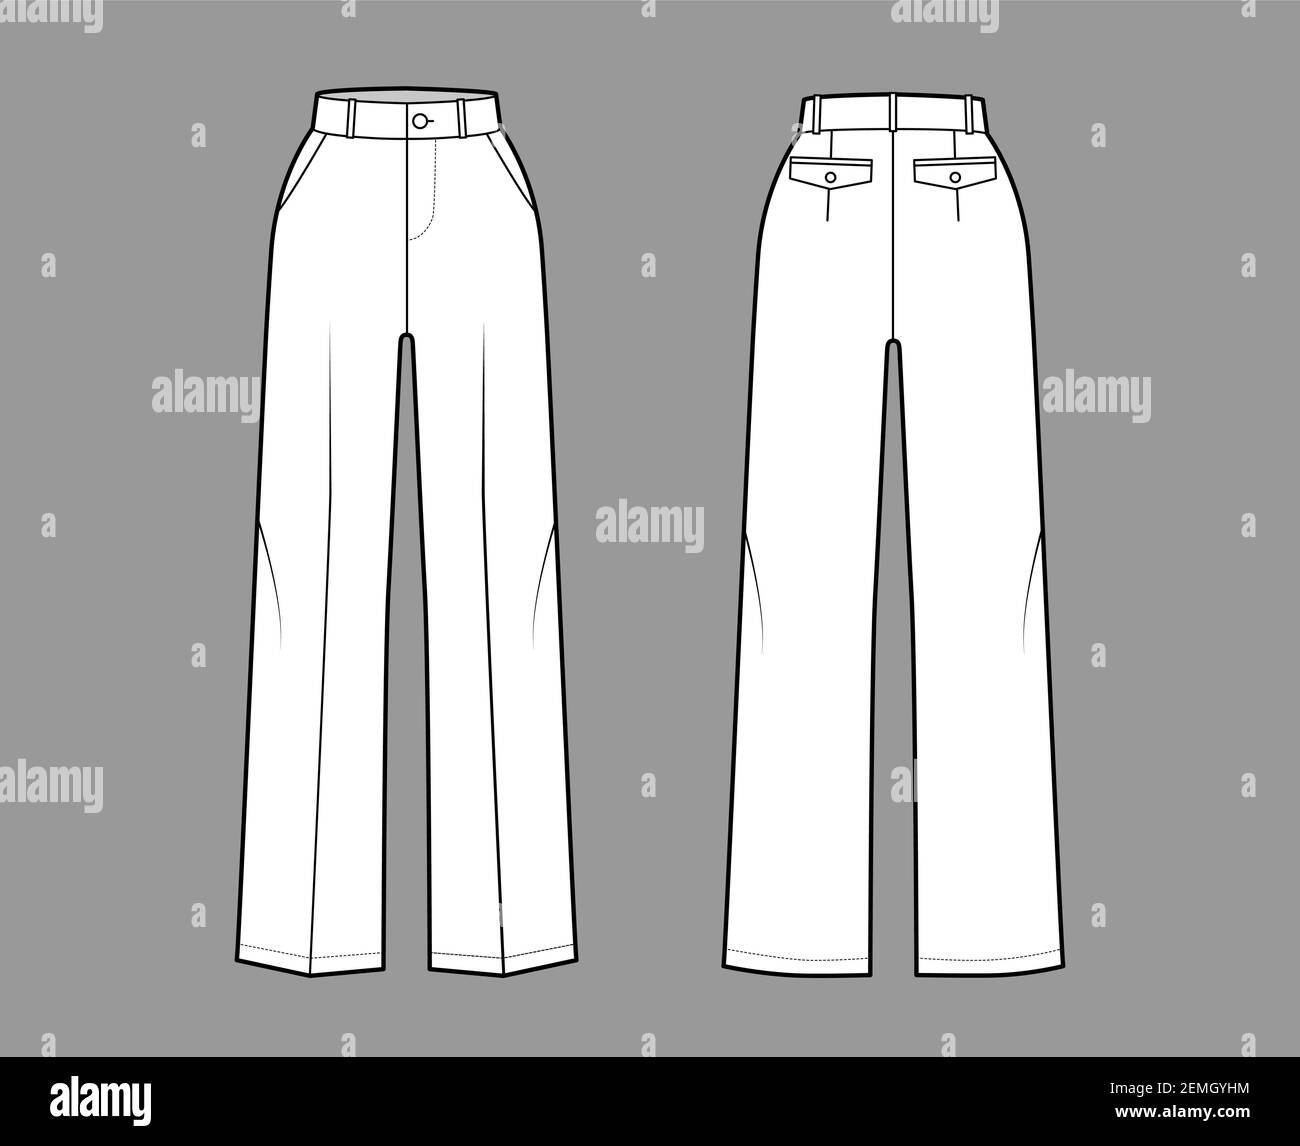 Flap trousers Stock Vector Images - Alamy